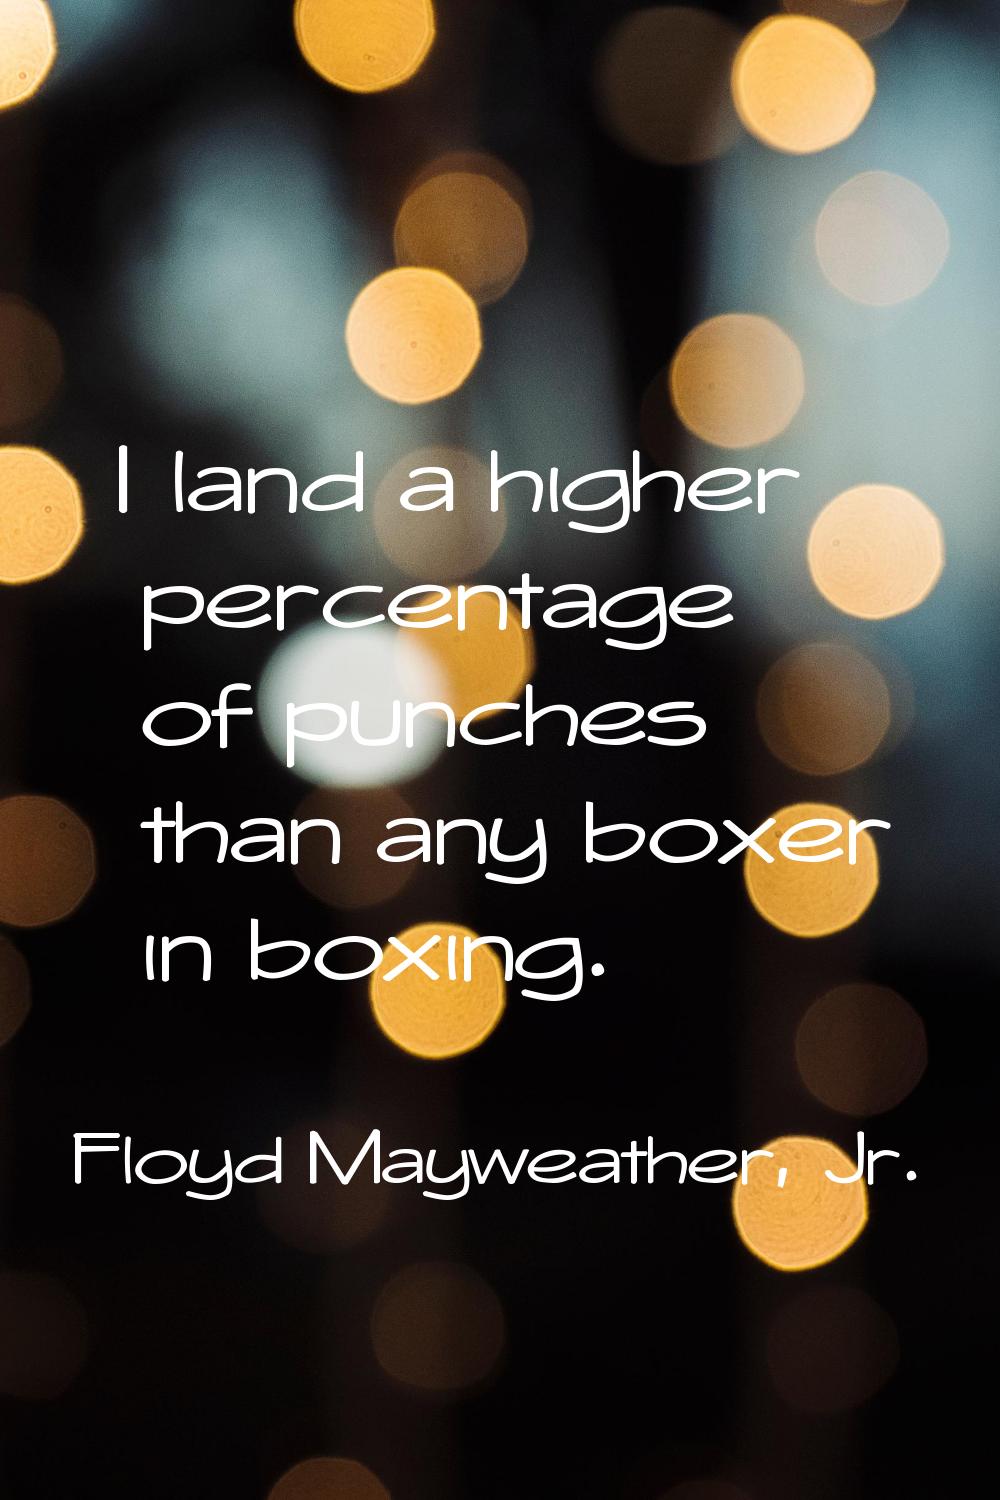 I land a higher percentage of punches than any boxer in boxing.